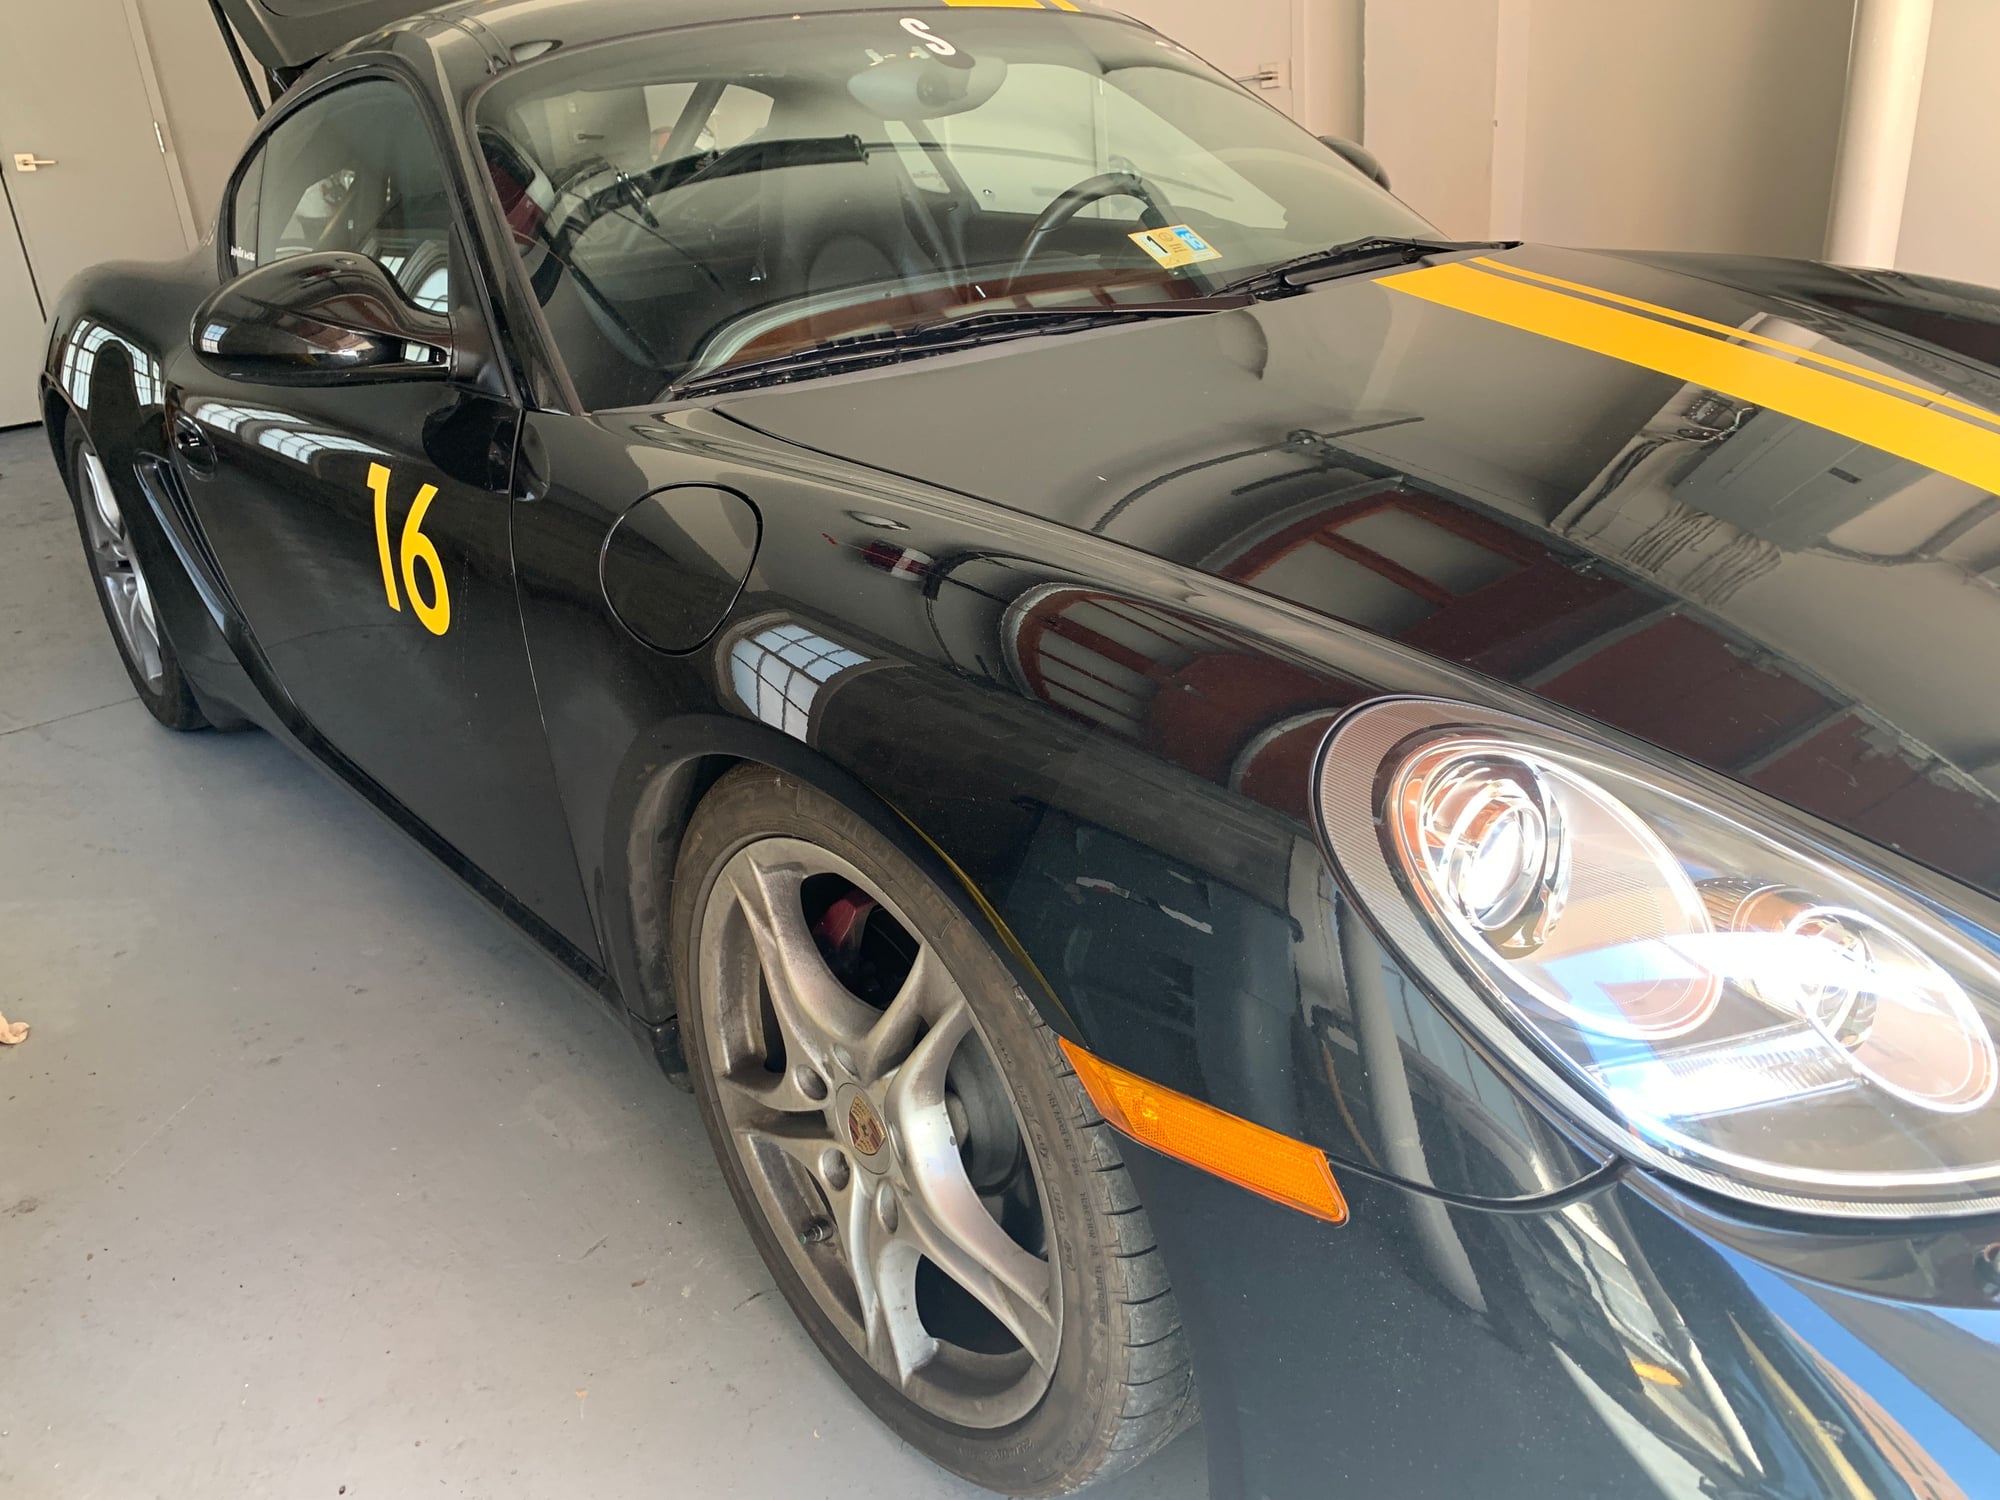 2010 Porsche Cayman - 2010 Cayman S: Perfect HPDE Car - Used - VIN WP0AB2A86AU780241 - 26,267 Miles - 6 cyl - 2WD - Manual - Coupe - Black - Baltimore, MD 21231, United States